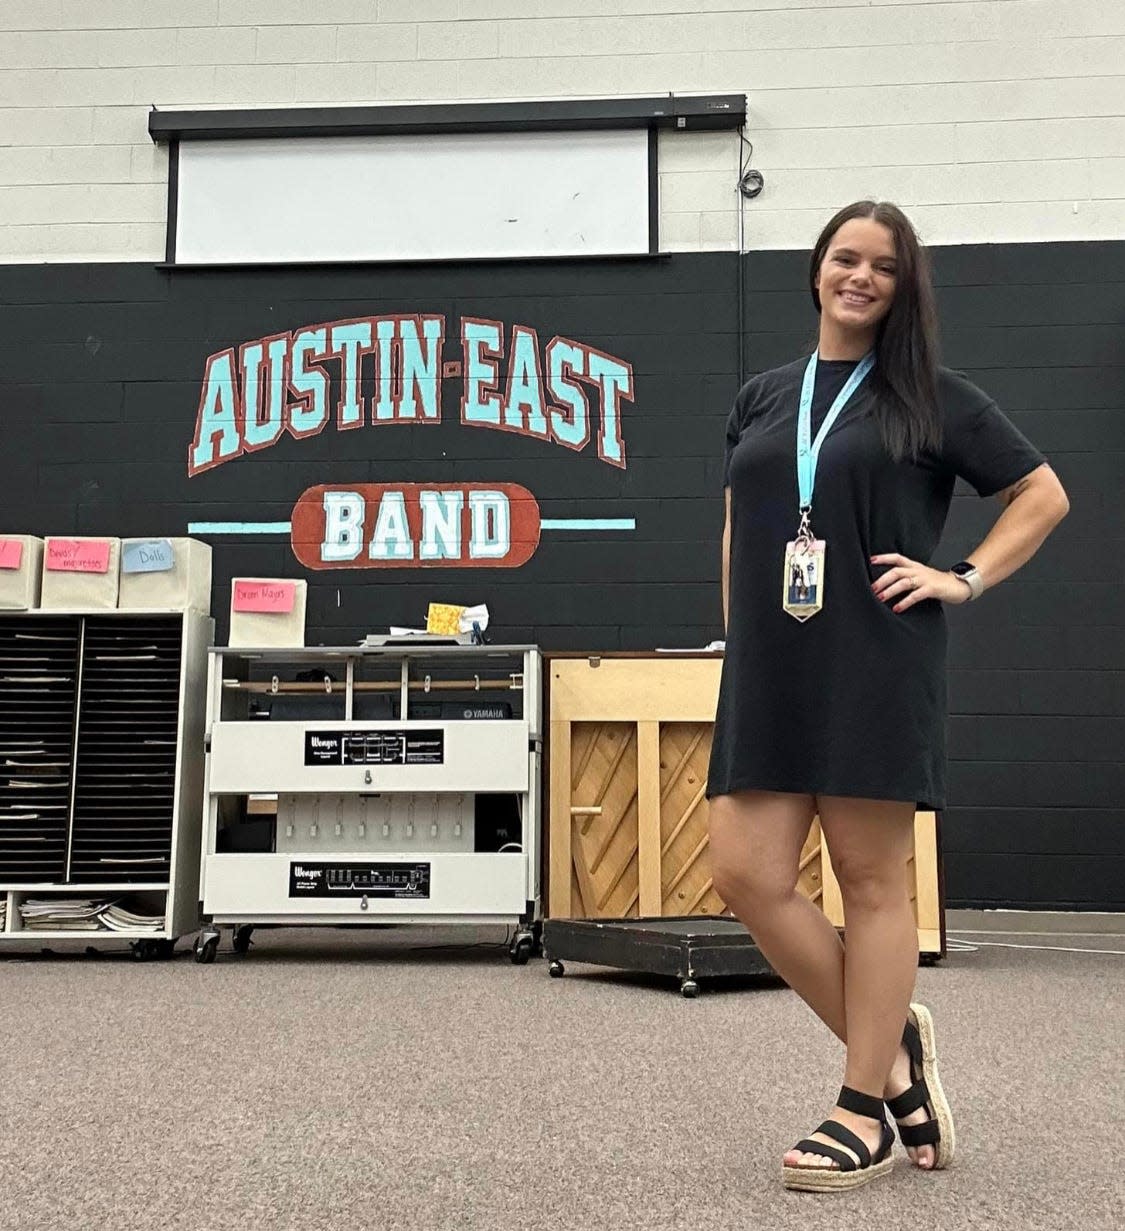 The Austin-East Marching Roadrunners got Alyx Blumenstock −  a veritable dynamo − as their new director, and then got a big surprise Oct. 24 when Ray Huffaker of the Rusty Wallace car dealerships presented them with a check for $30,000.